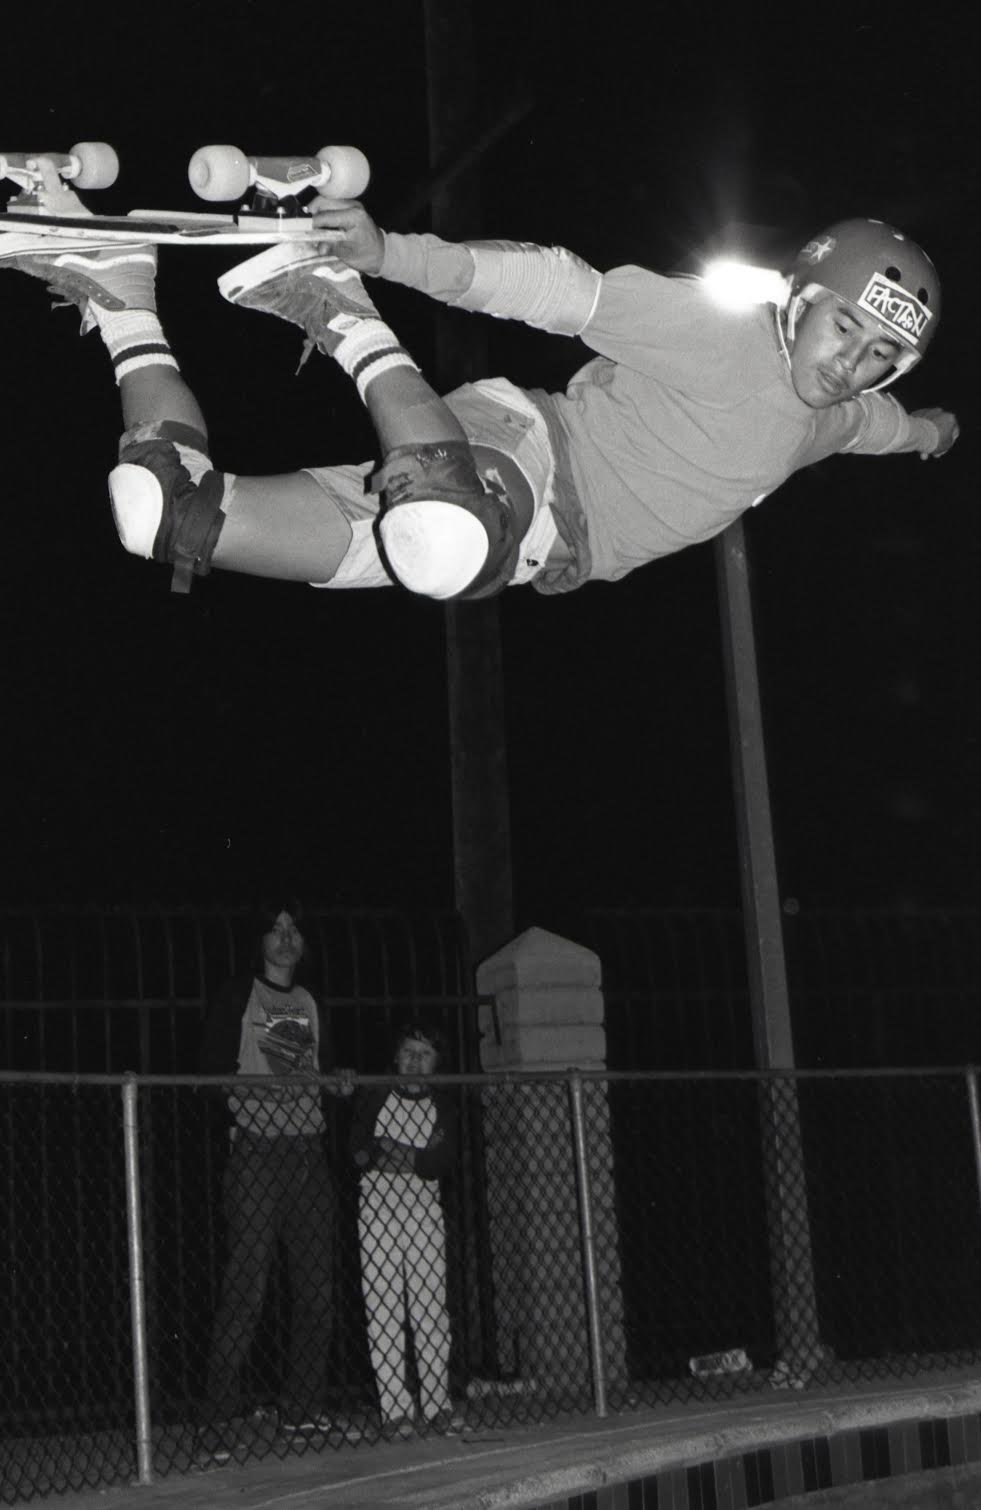  Steve "Cab" Caballero at the Whittier Skate Park, Whittier, CA, 1982. Photograph by Edward Colver. 